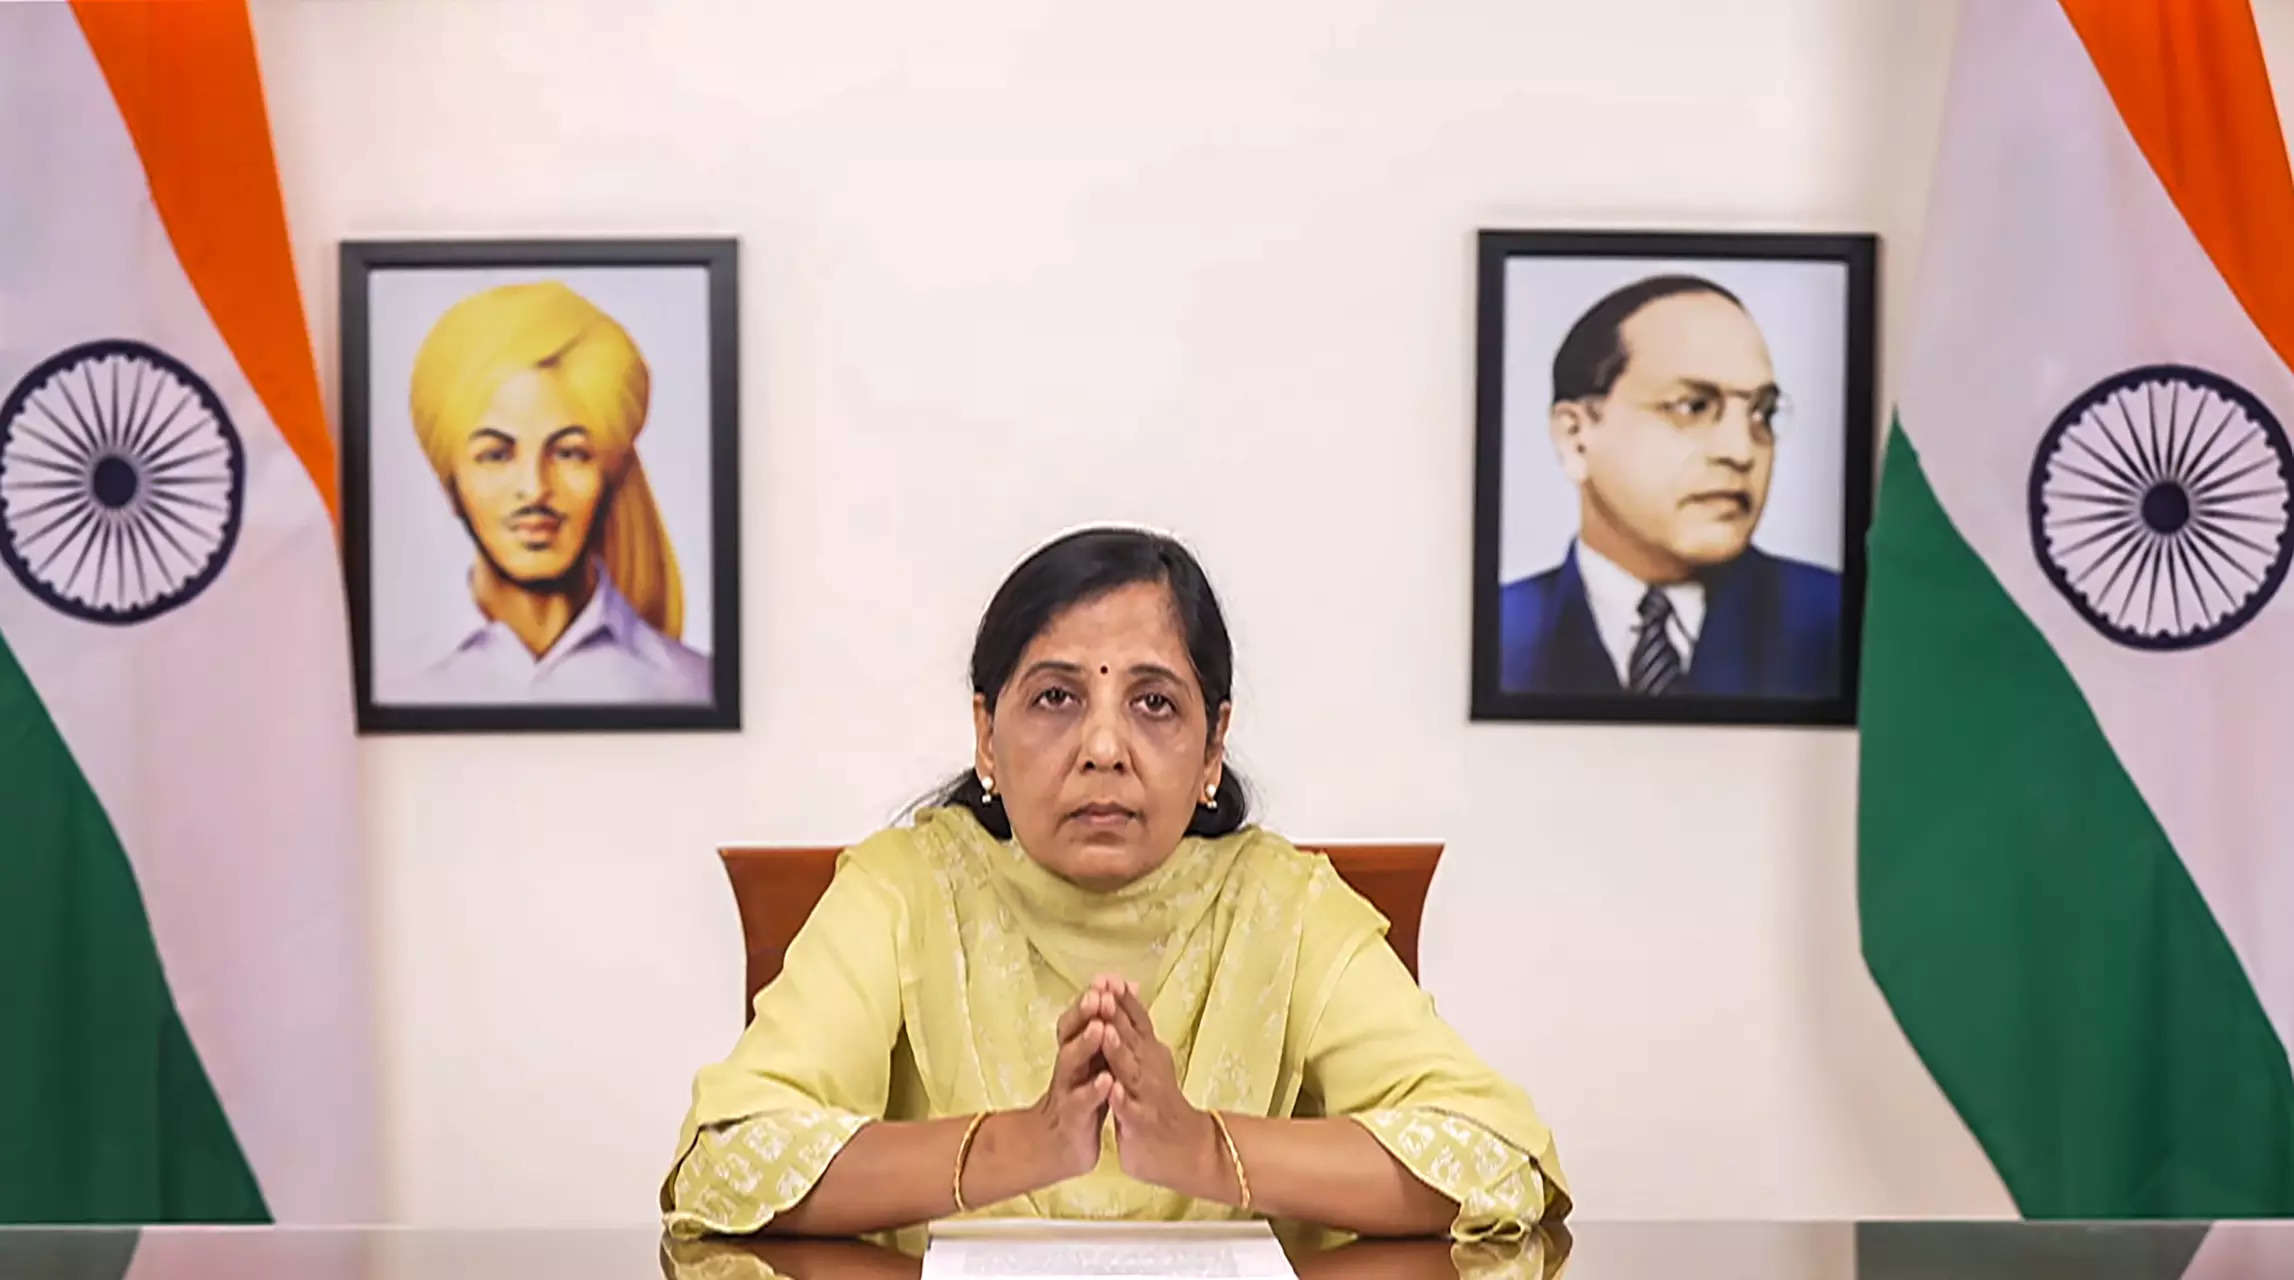 Arvind Kejriwal's wife Sunita Kejriwal launches WhatsApp campaign to garner support for AAP leader 